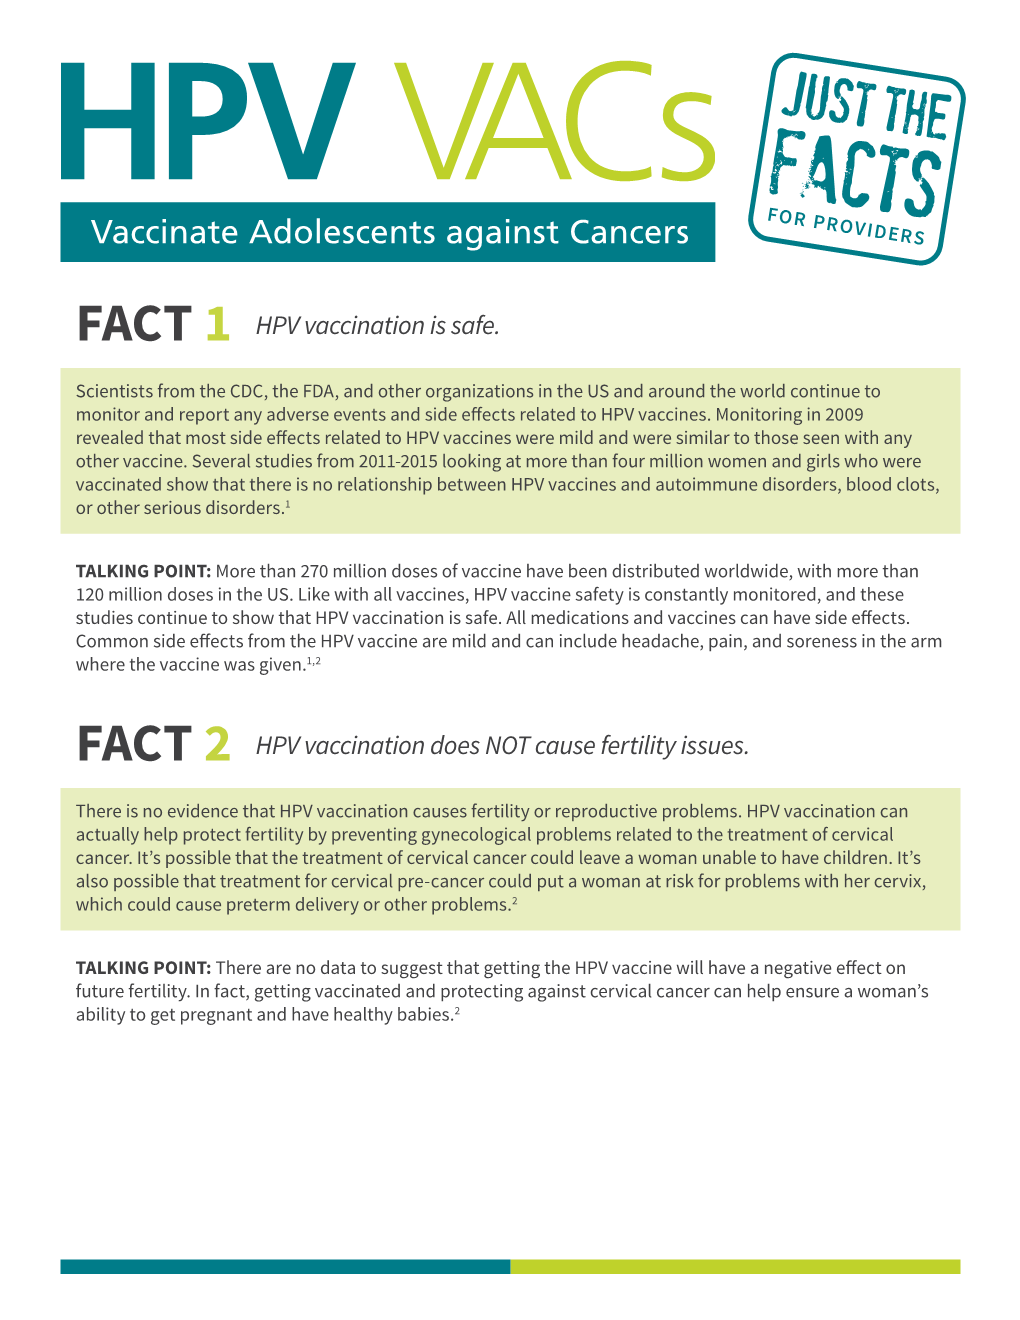 FACT 1 HPV Vaccination Is Safe